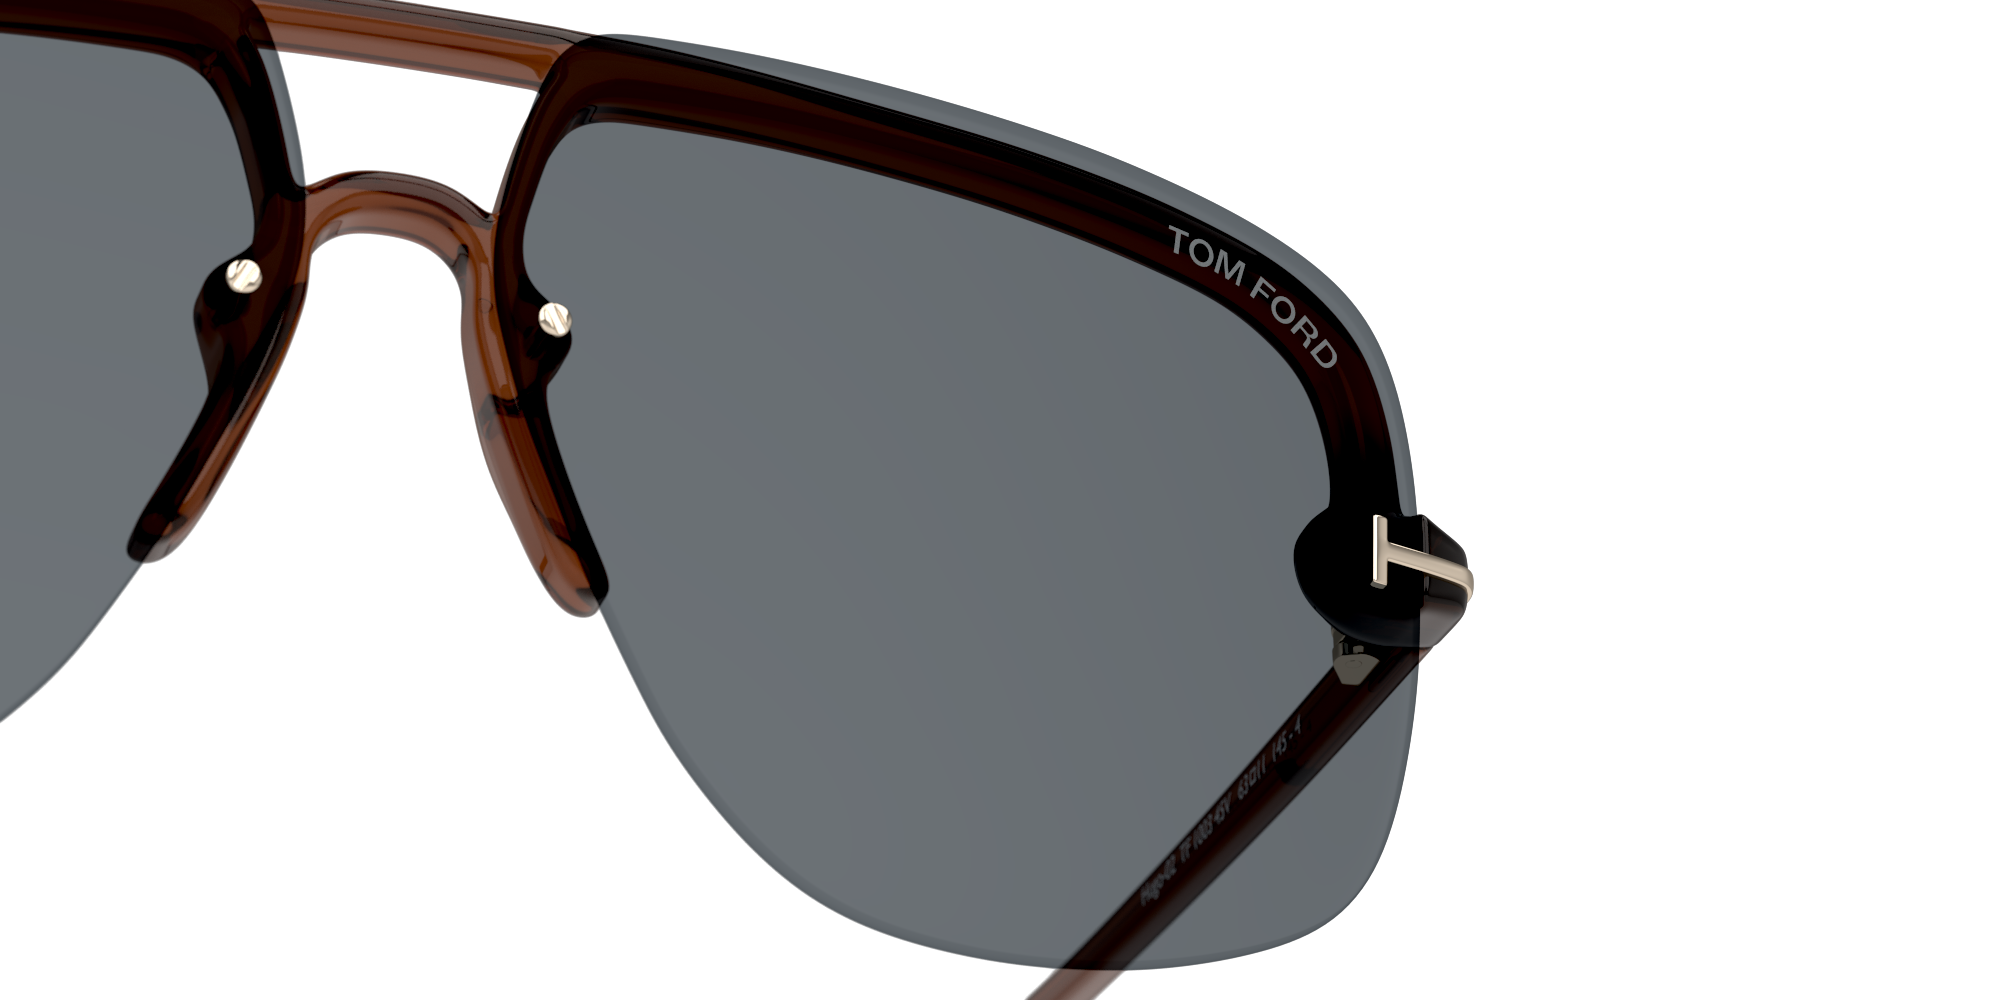 Detail01 Tom Ford FT 1003 Sunglasses Blue / Brown